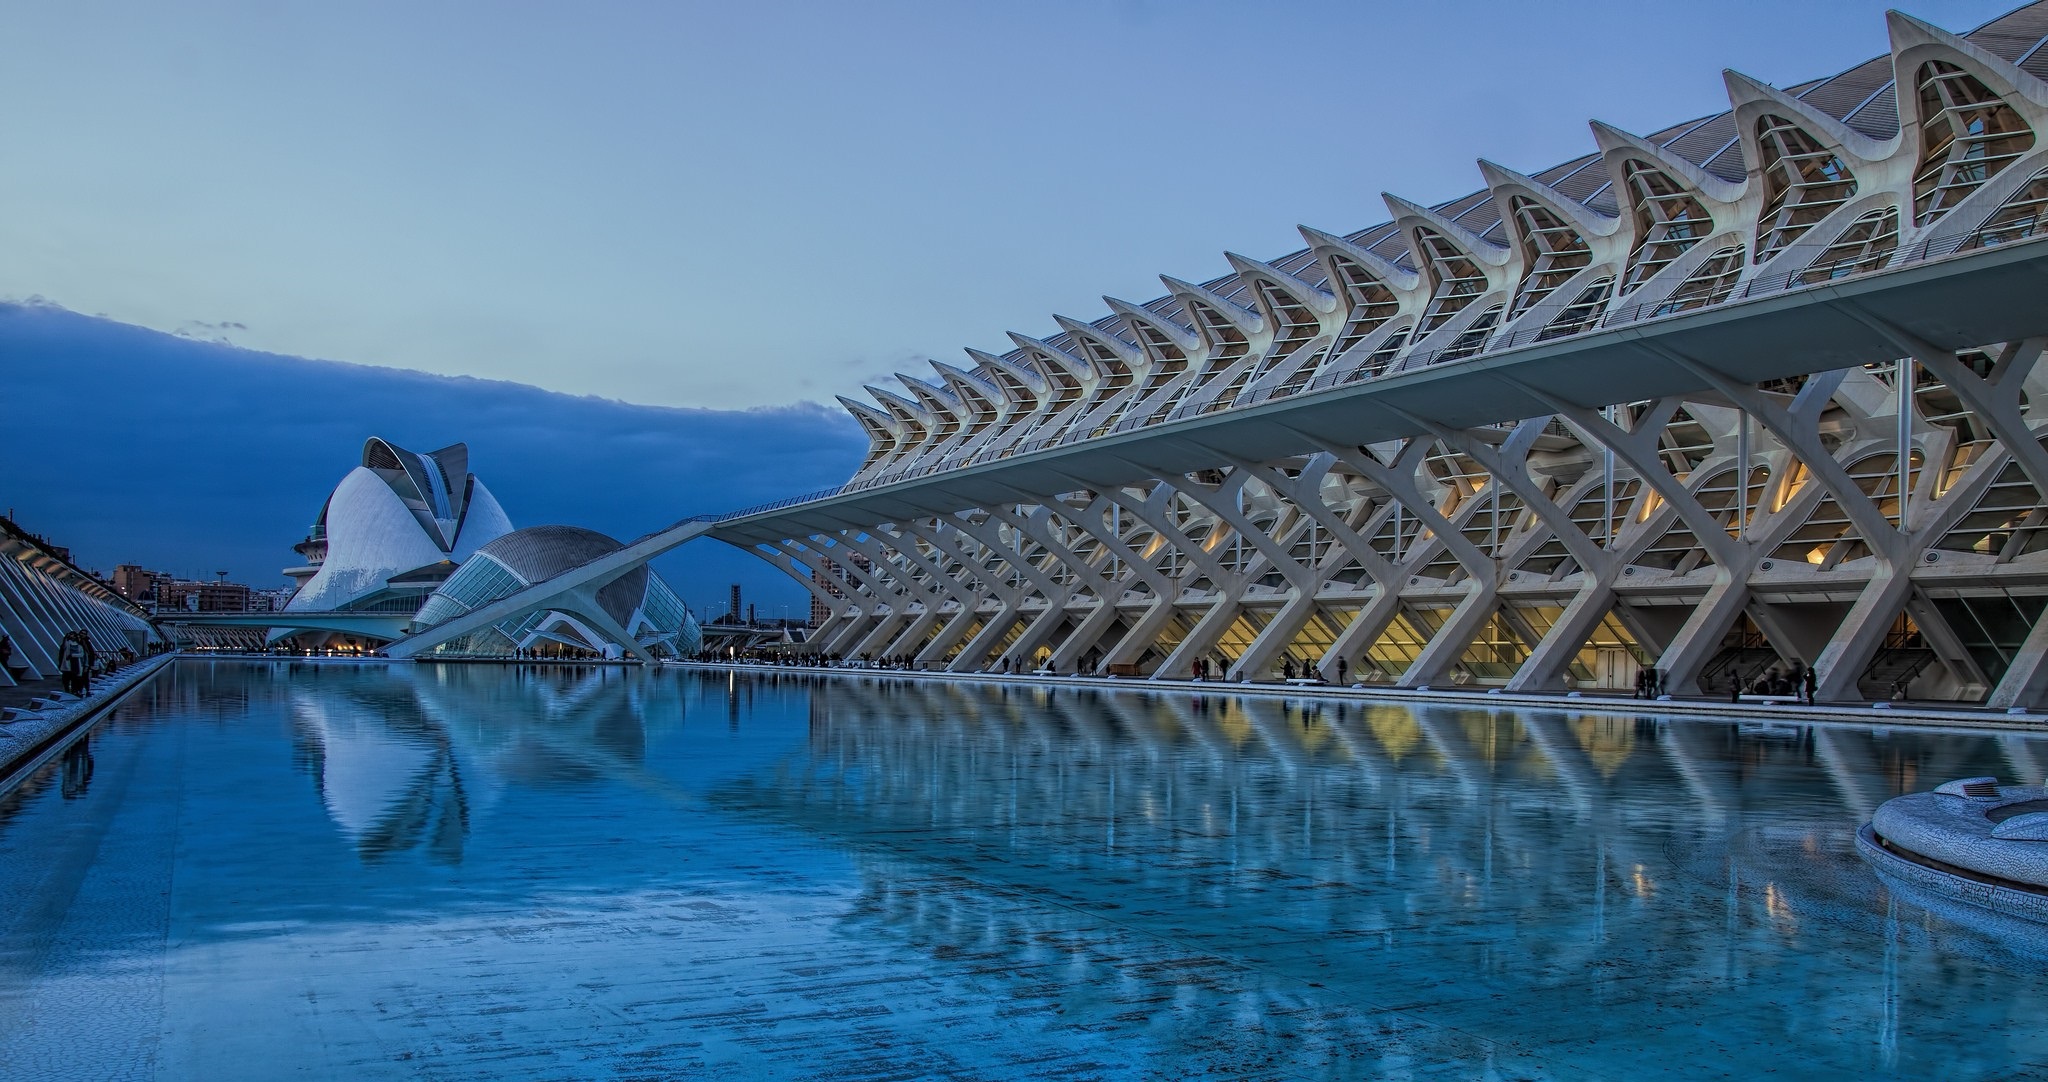 Man Made City Of Arts And Sciences HD Wallpaper | Background Image